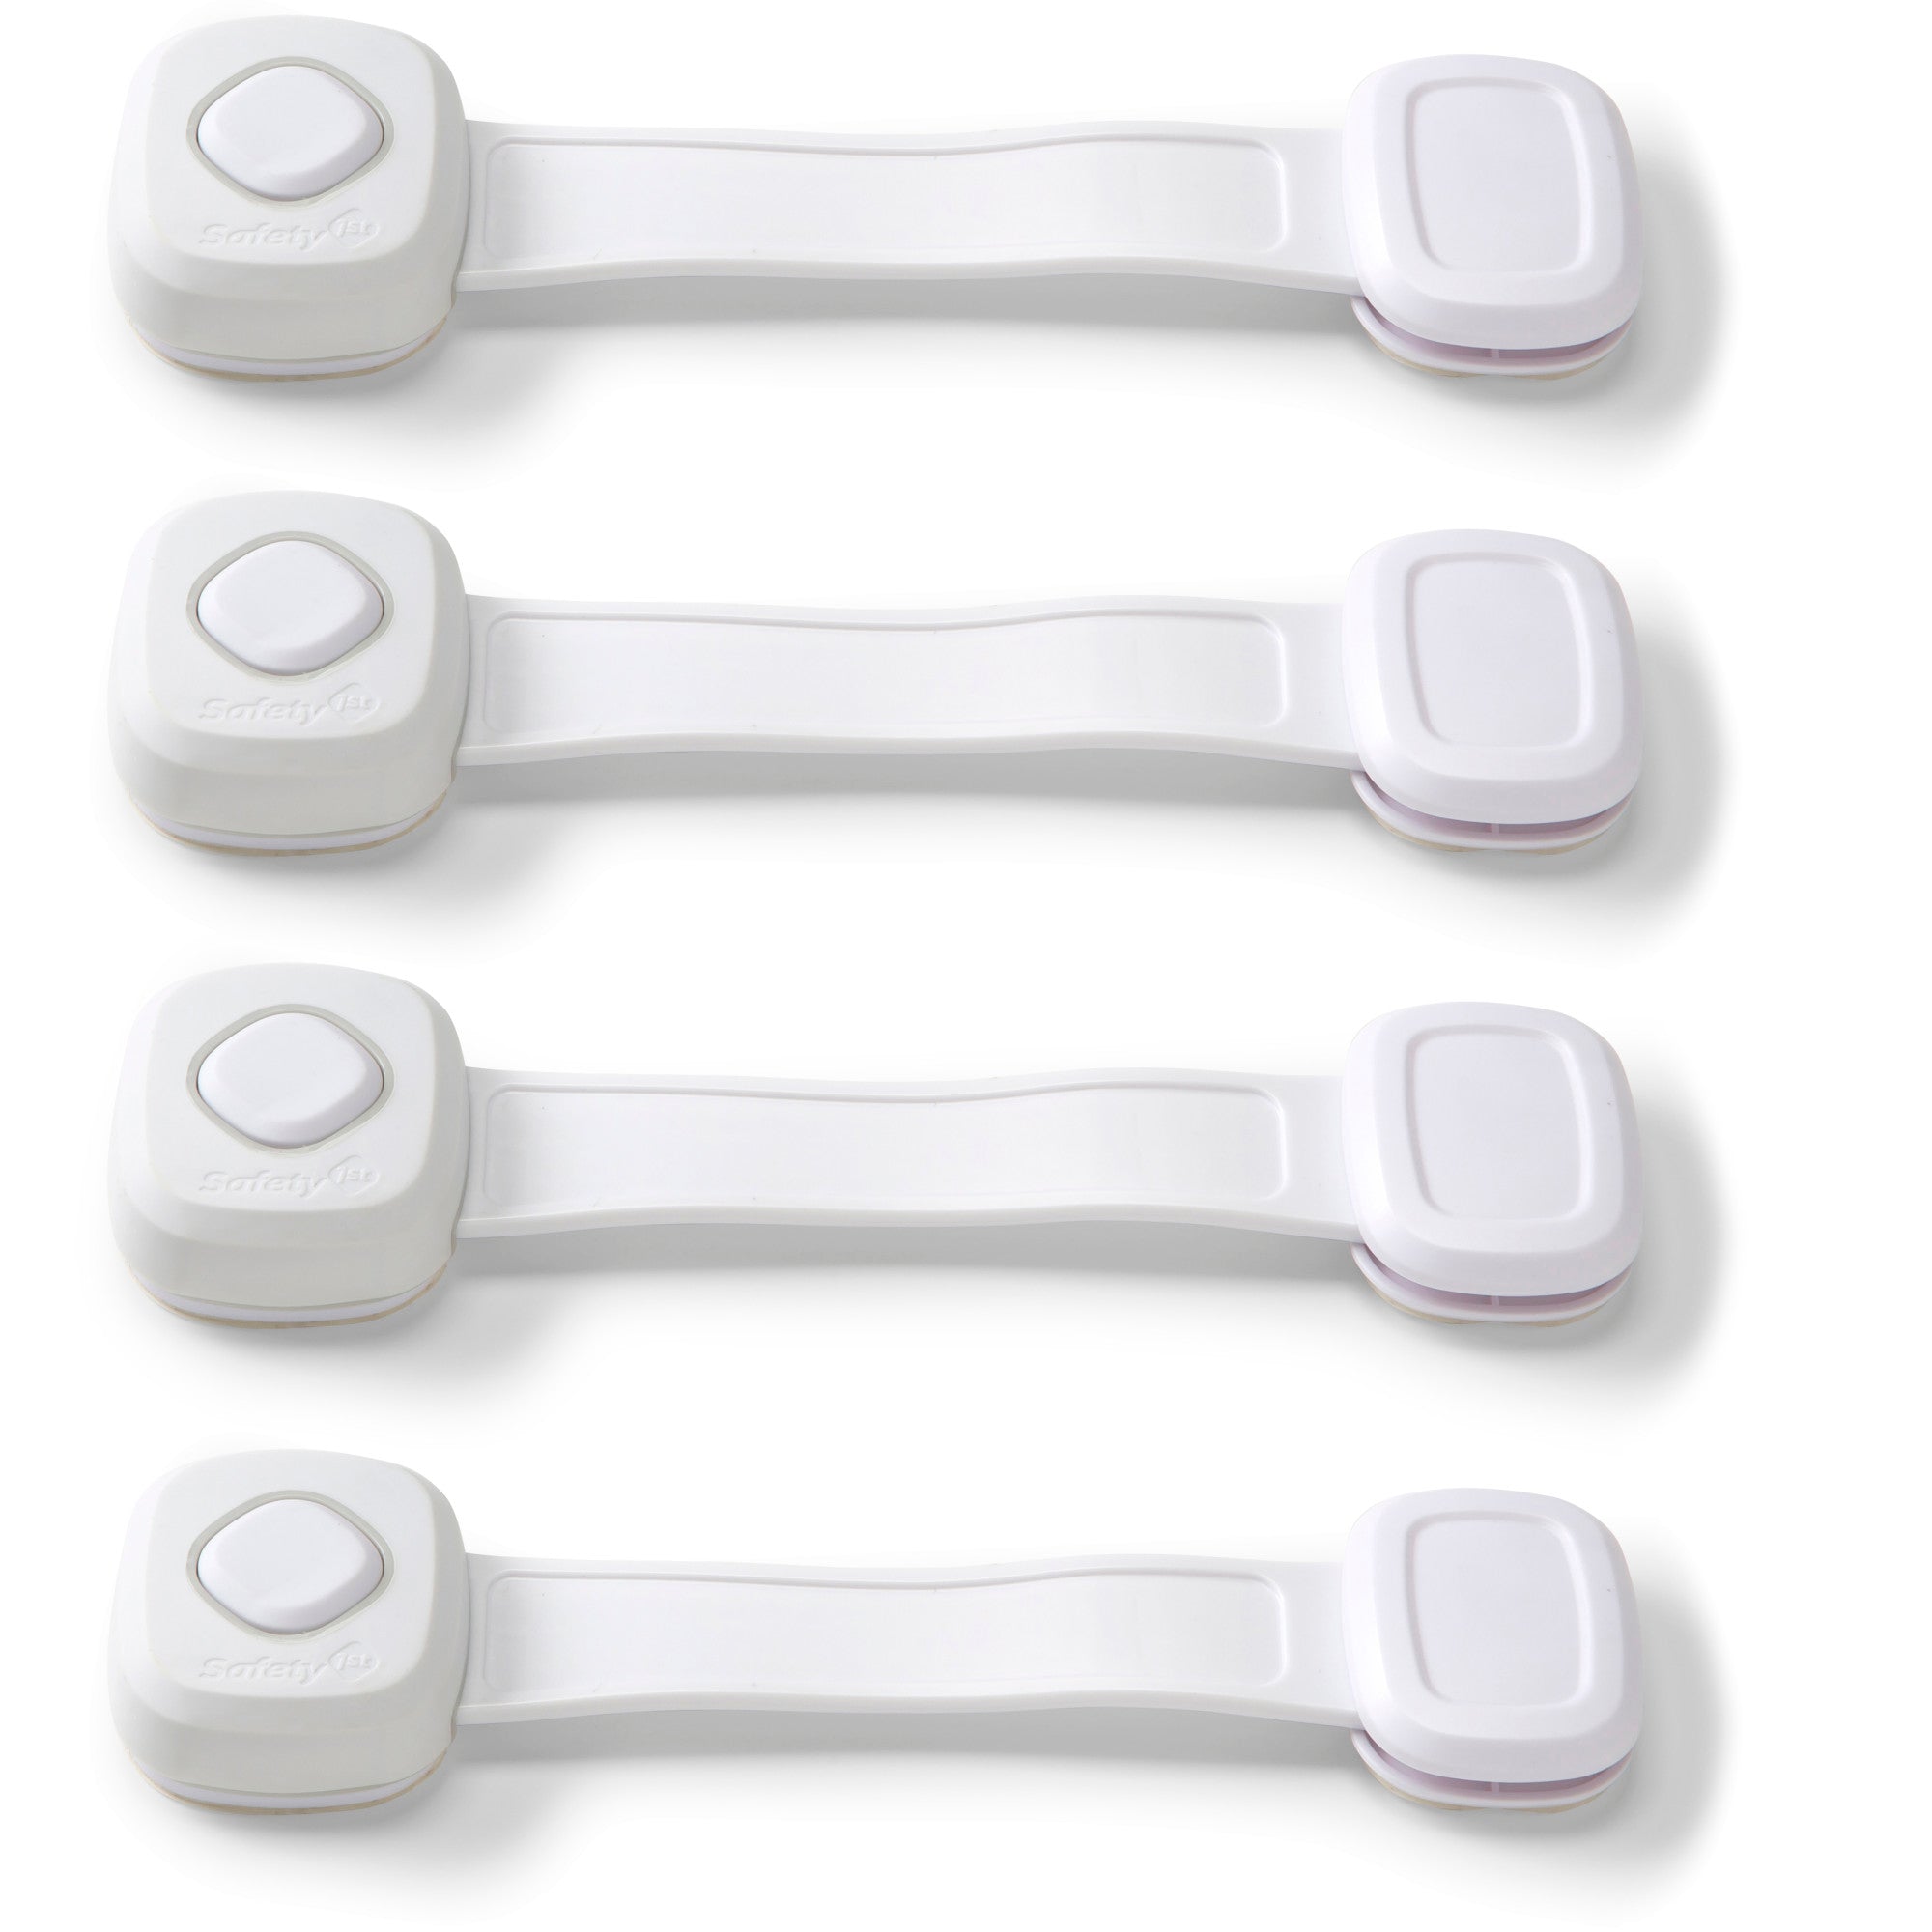 OutSmart™ Multi-Use Lock (4 Pack) - White